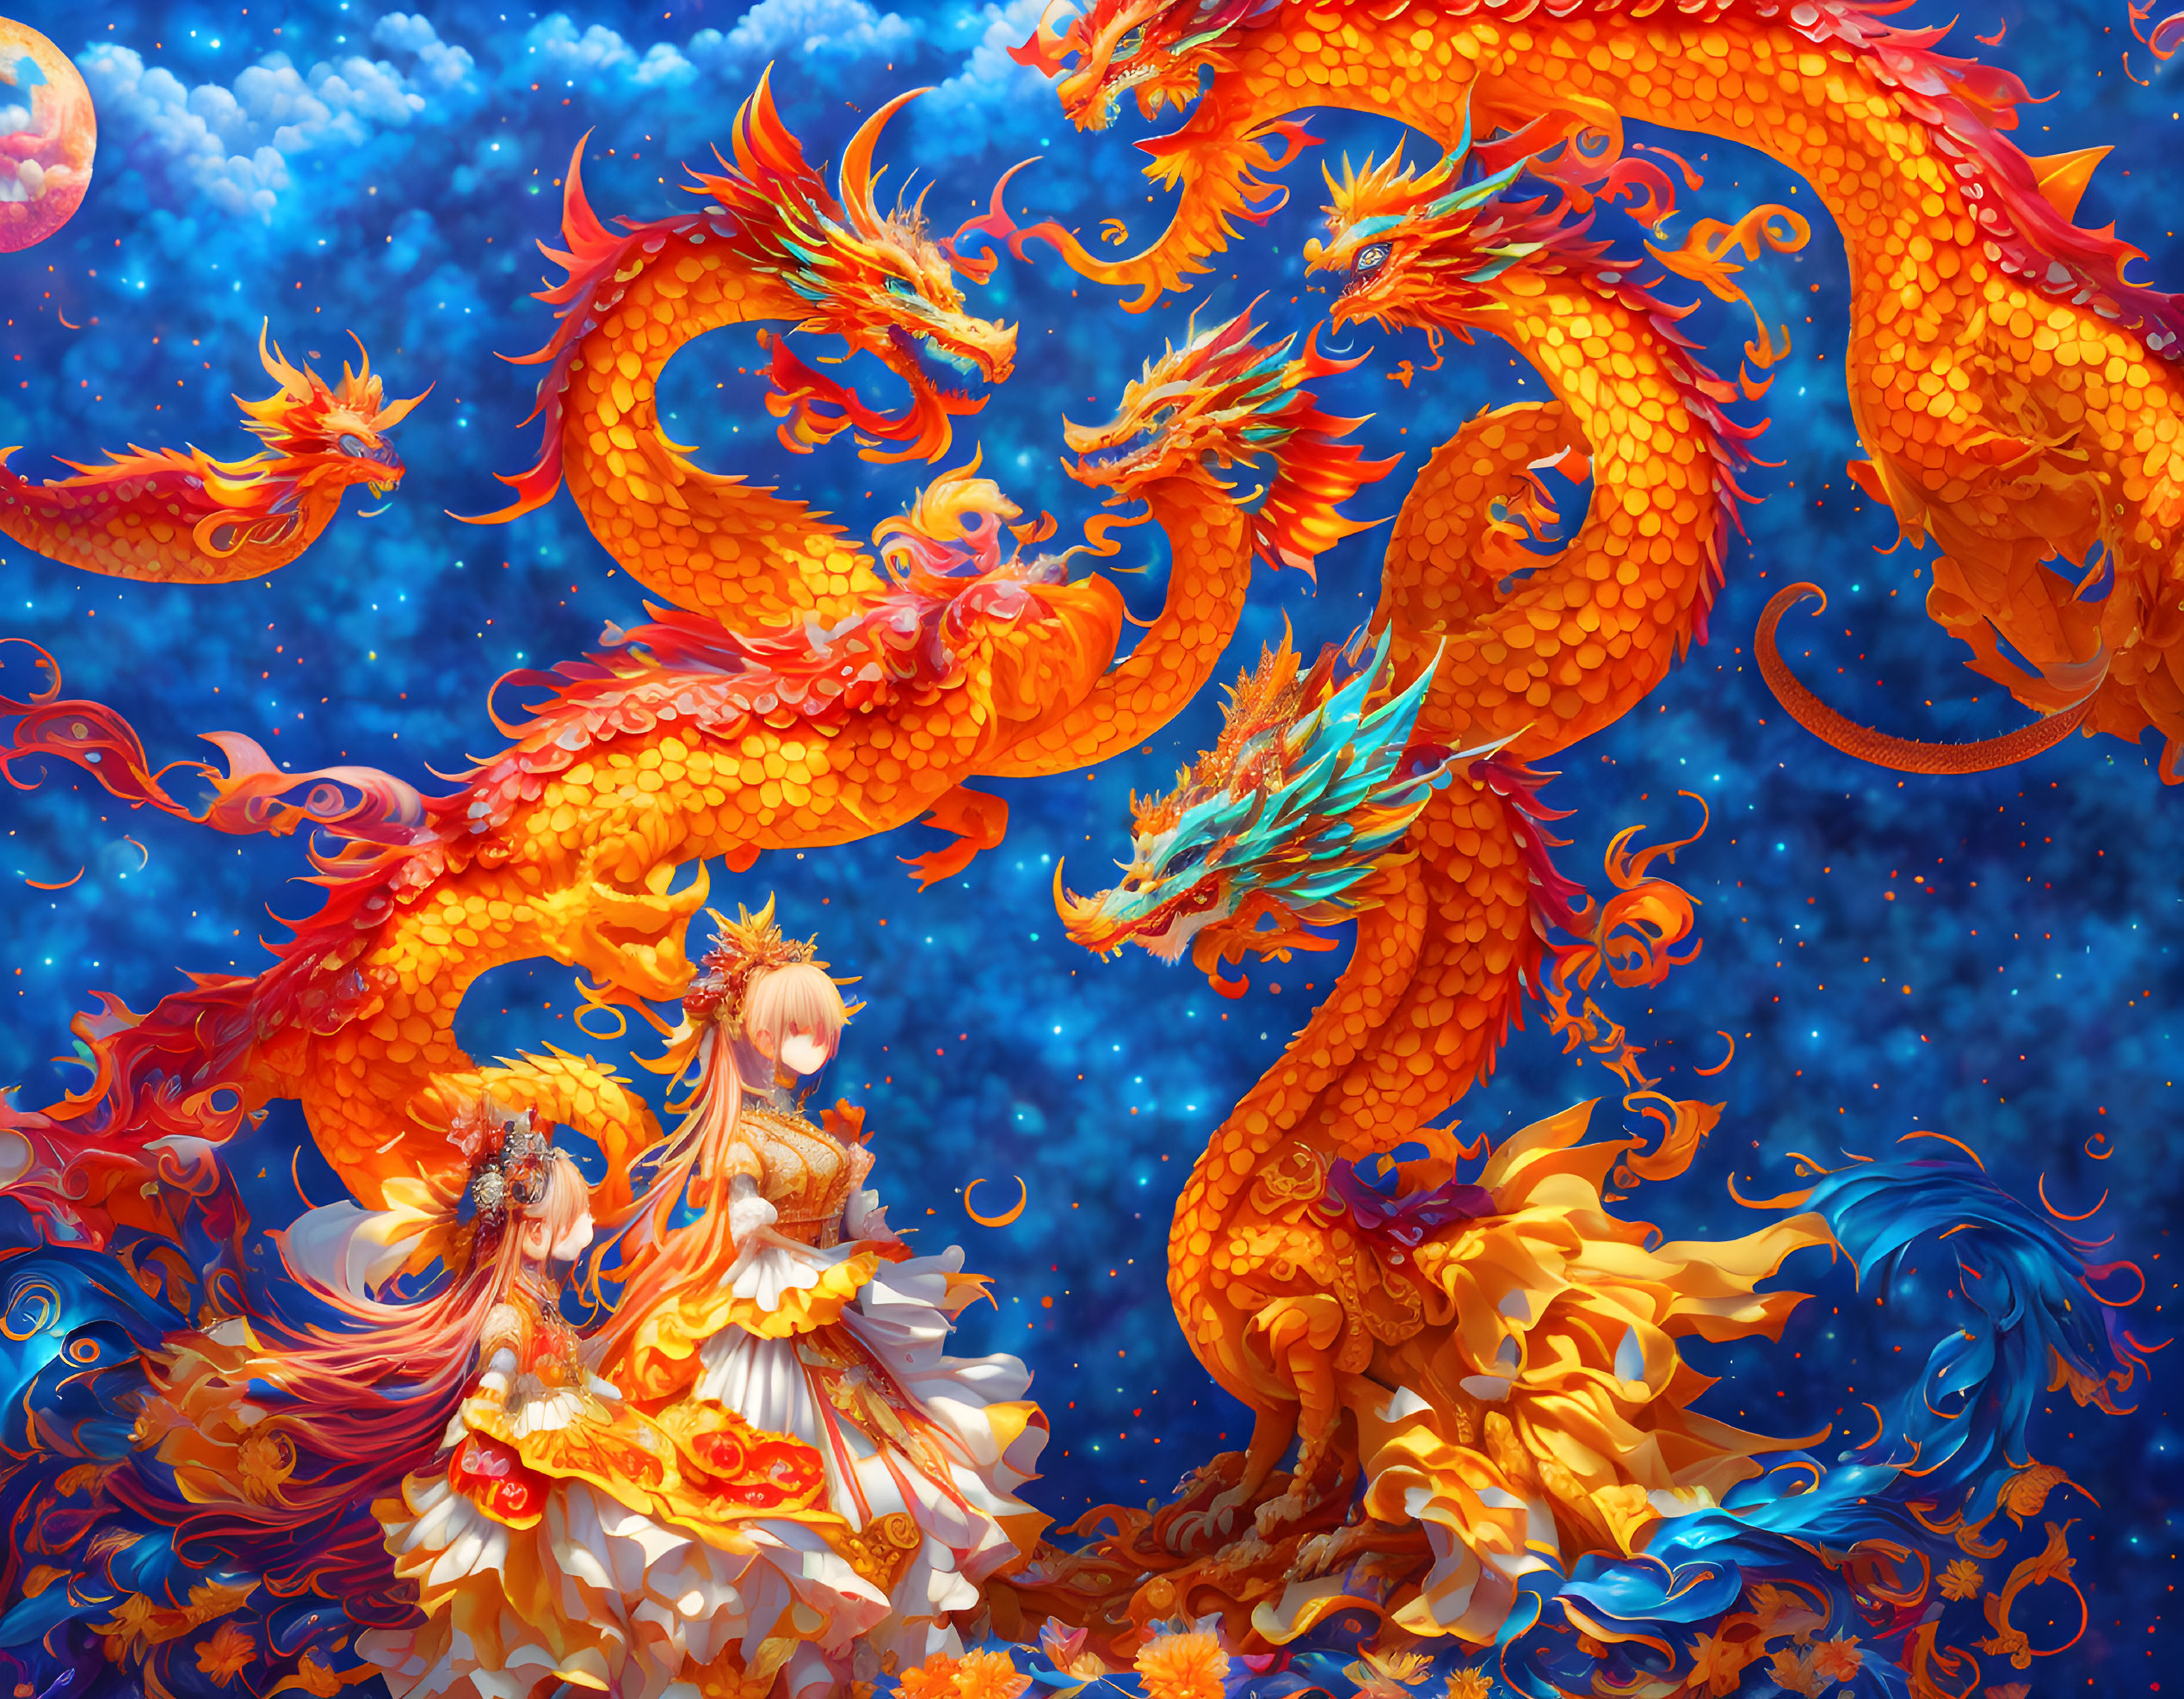 Illustration of girl in ornate attire with fiery dragons in sky